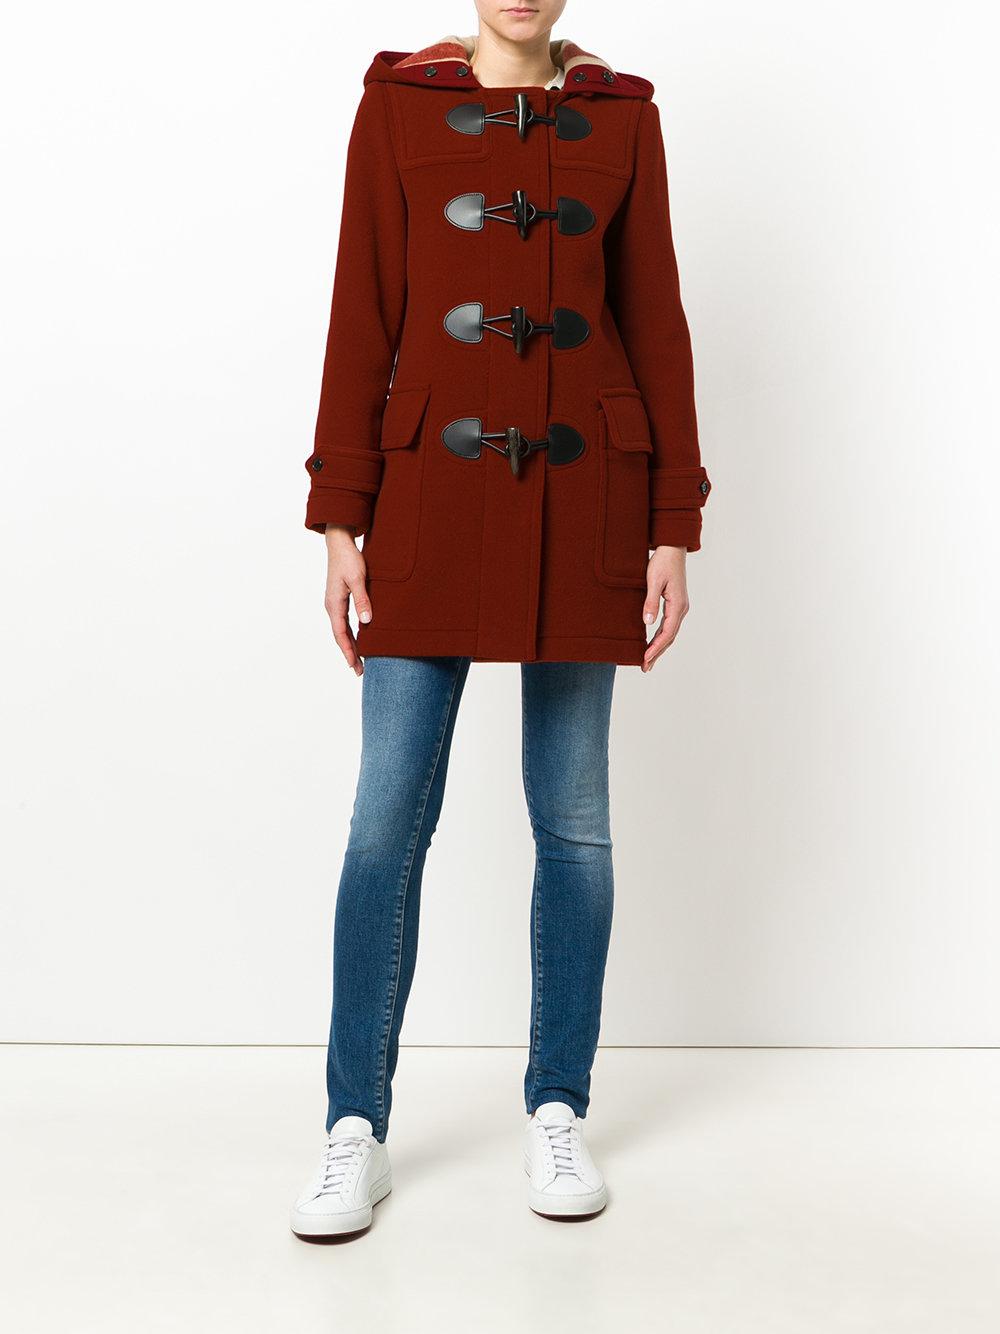 Burberry Wool The Mersey Duffle Coat in Red - Lyst